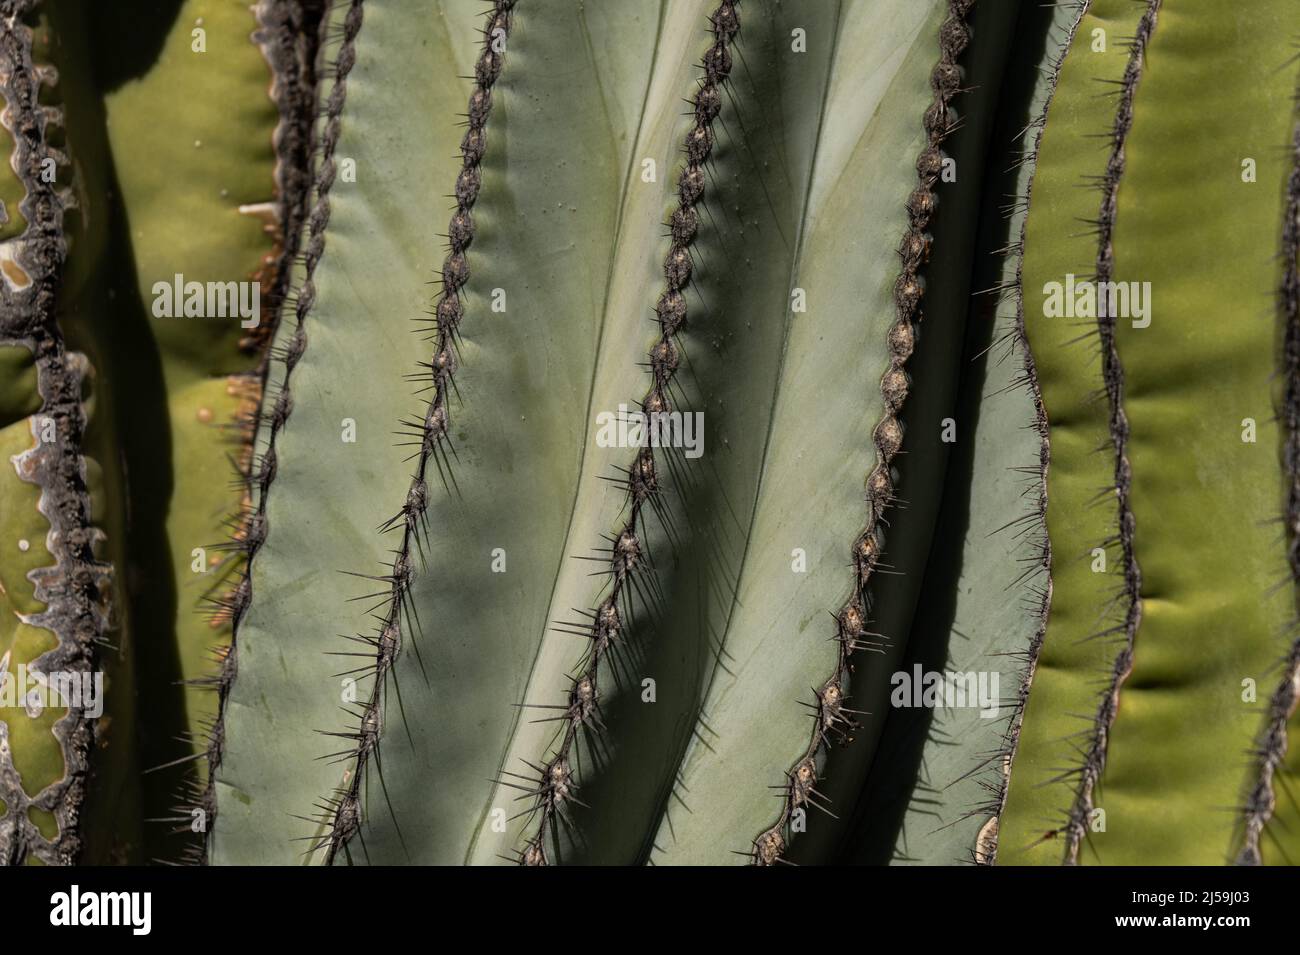 Extreme closeup of ribs on the trunks of a succulent Mexican Giant Cardon, pachycereus pringlei, in the Sonoran Desert in Mexico. Stock Photo